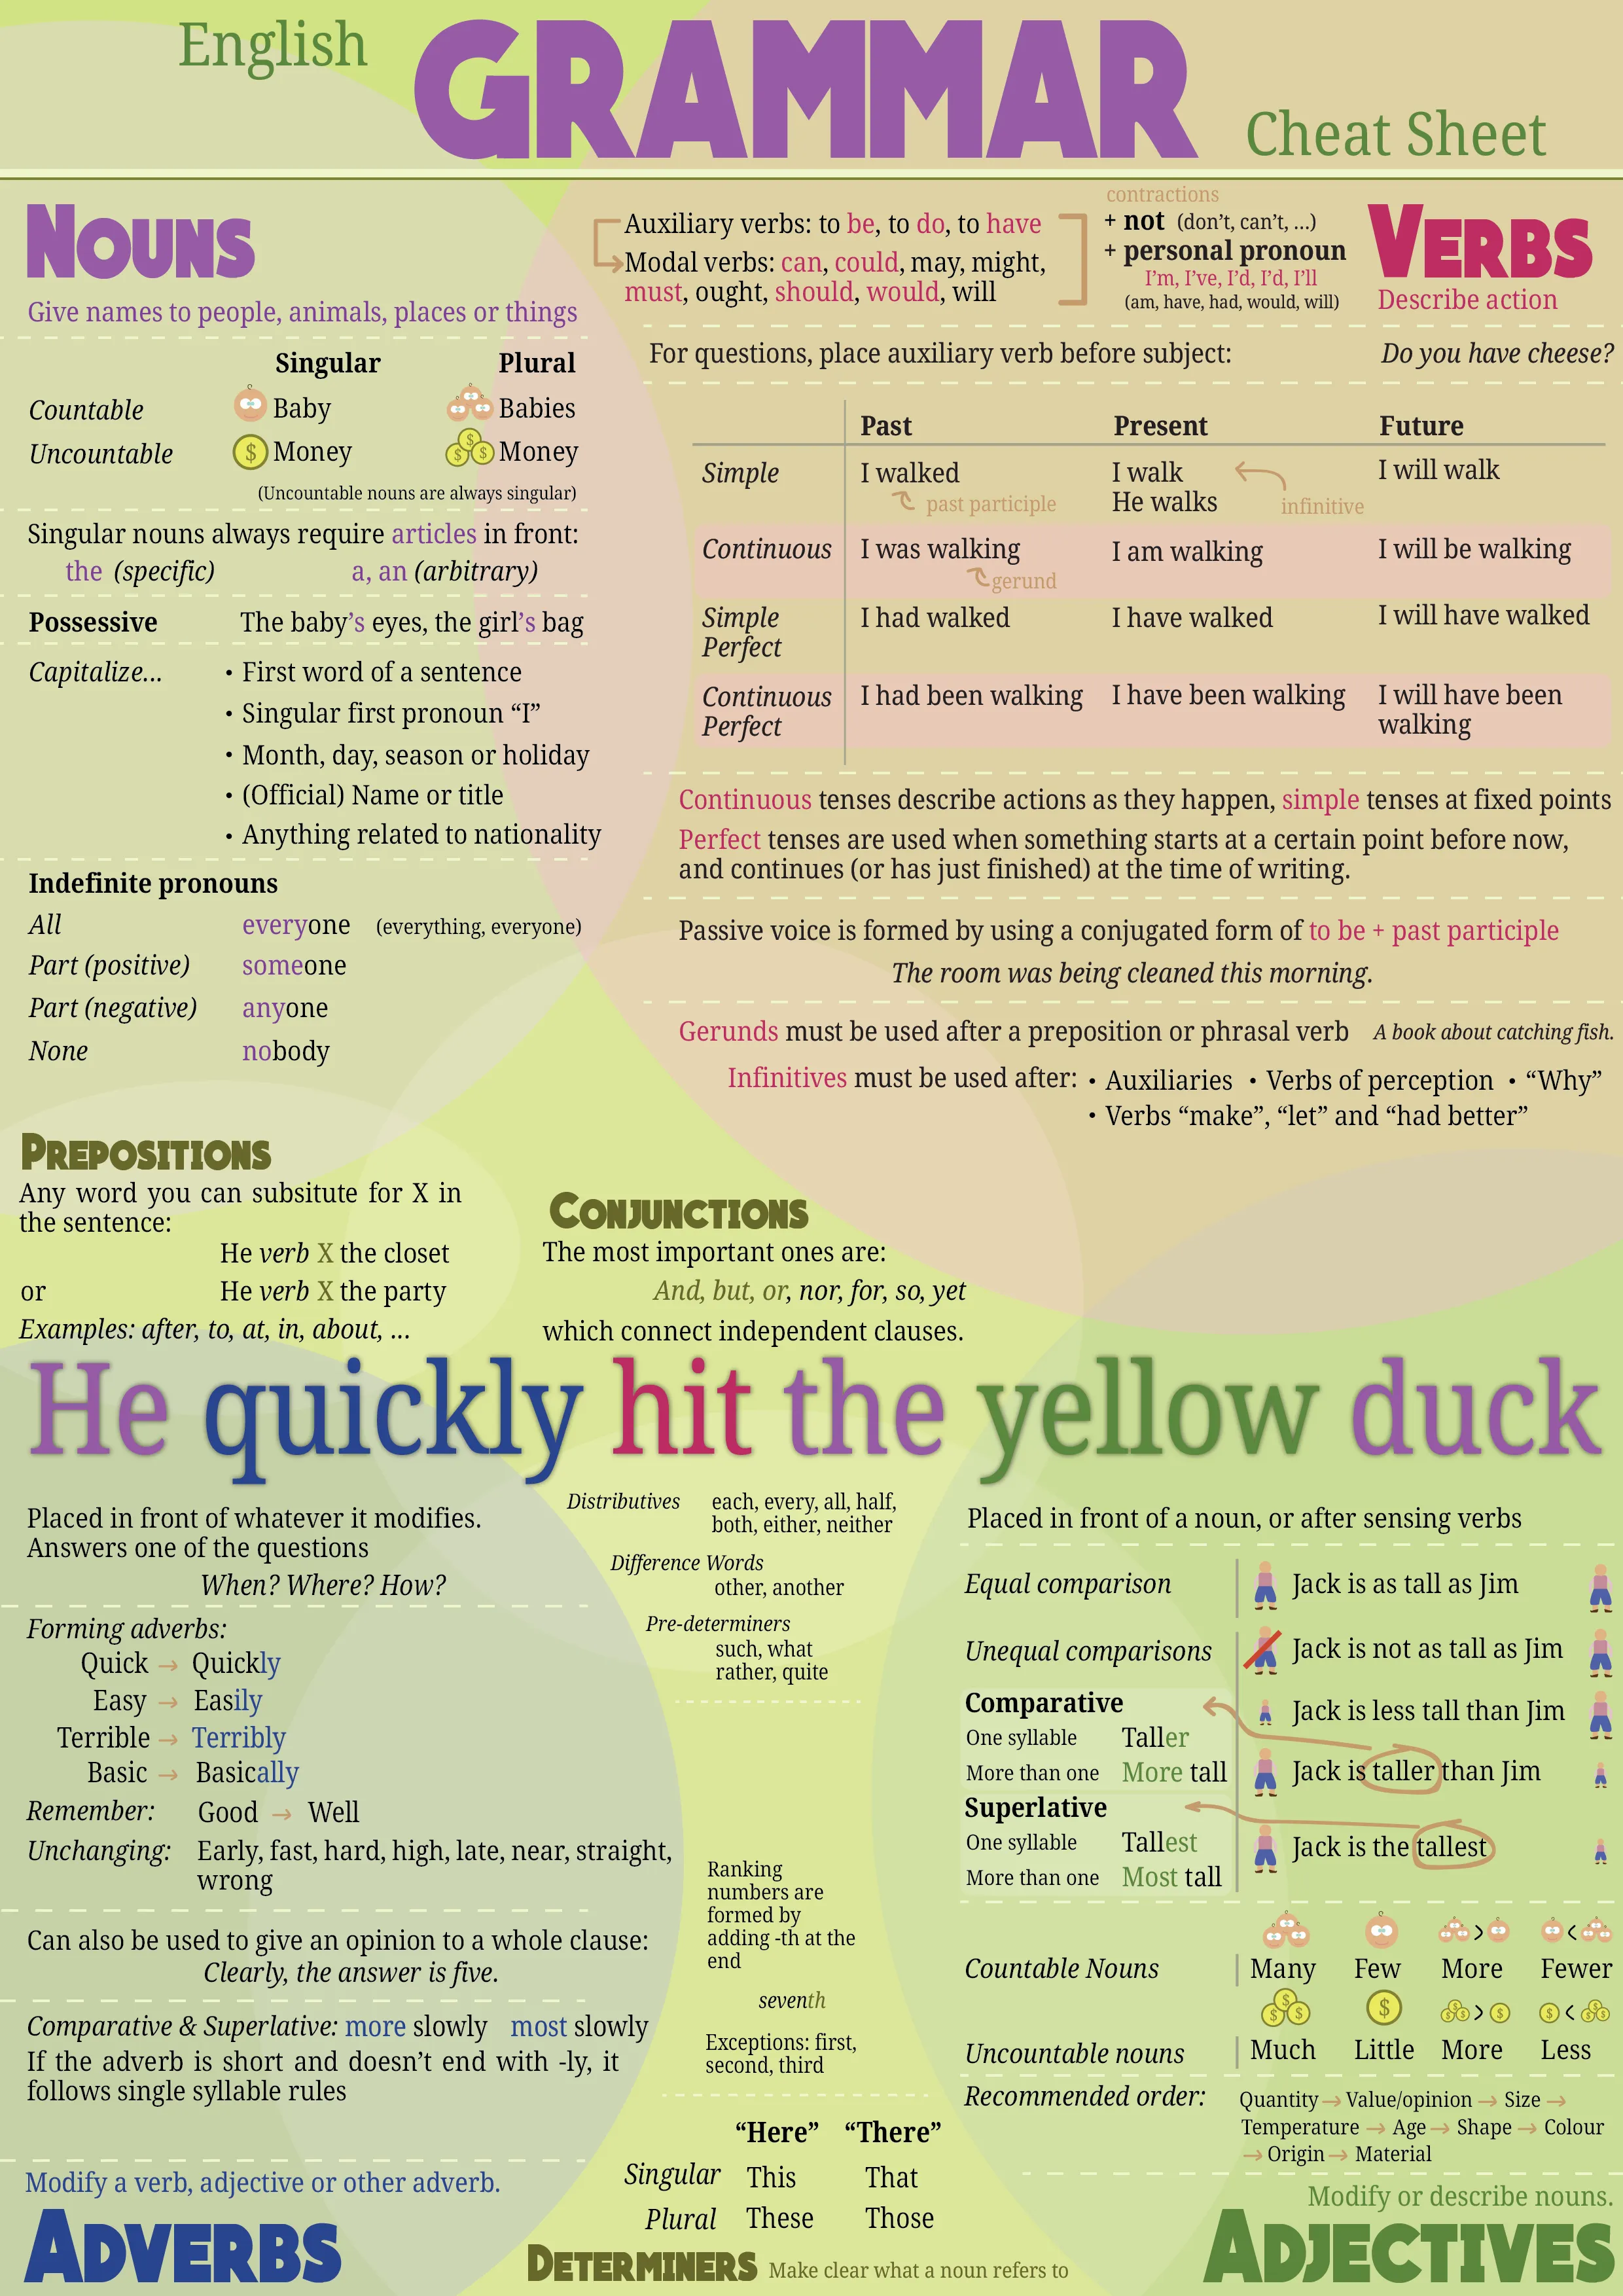 A cheat sheet with all the essential rules for English grammar